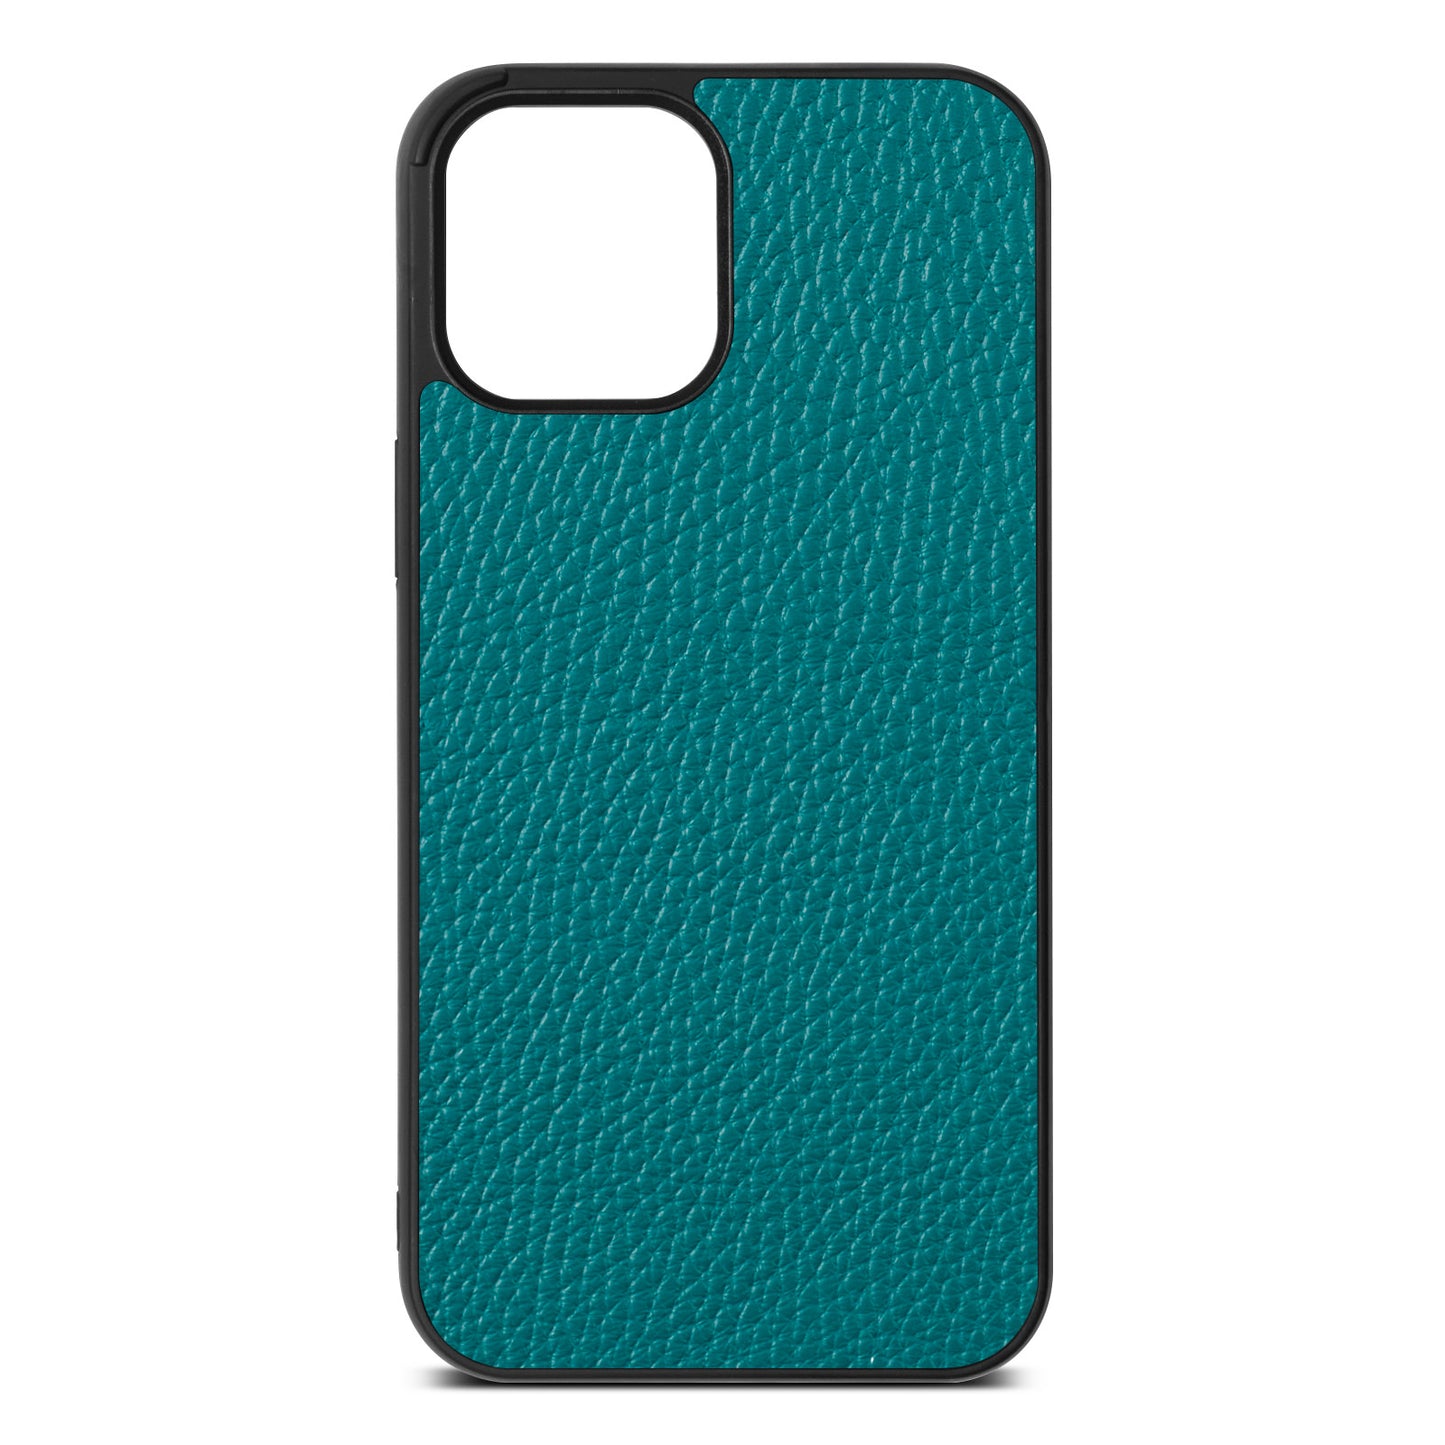 Blank iPhone 12 Pro Max Pebble Green Leather iPhone Case